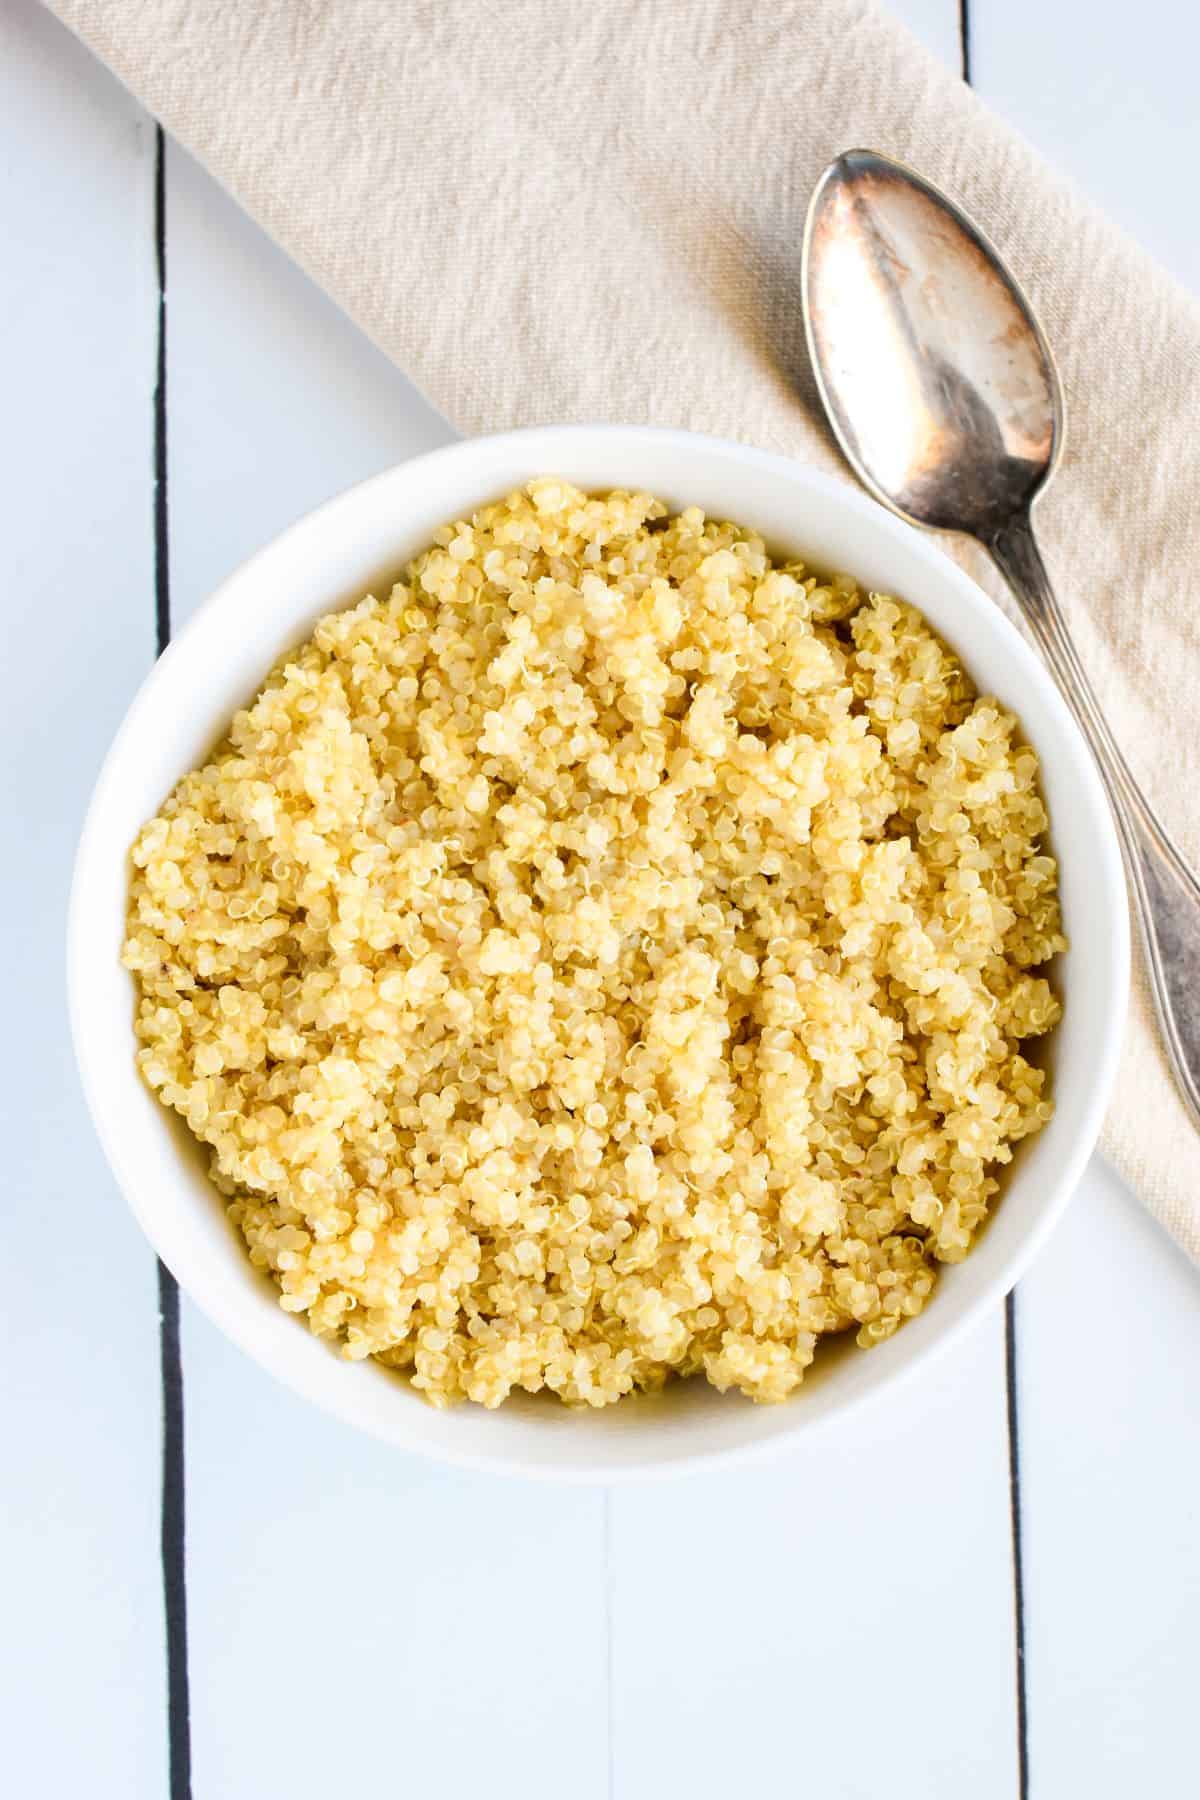 Cooked quinoa in a bowl with a spoon.